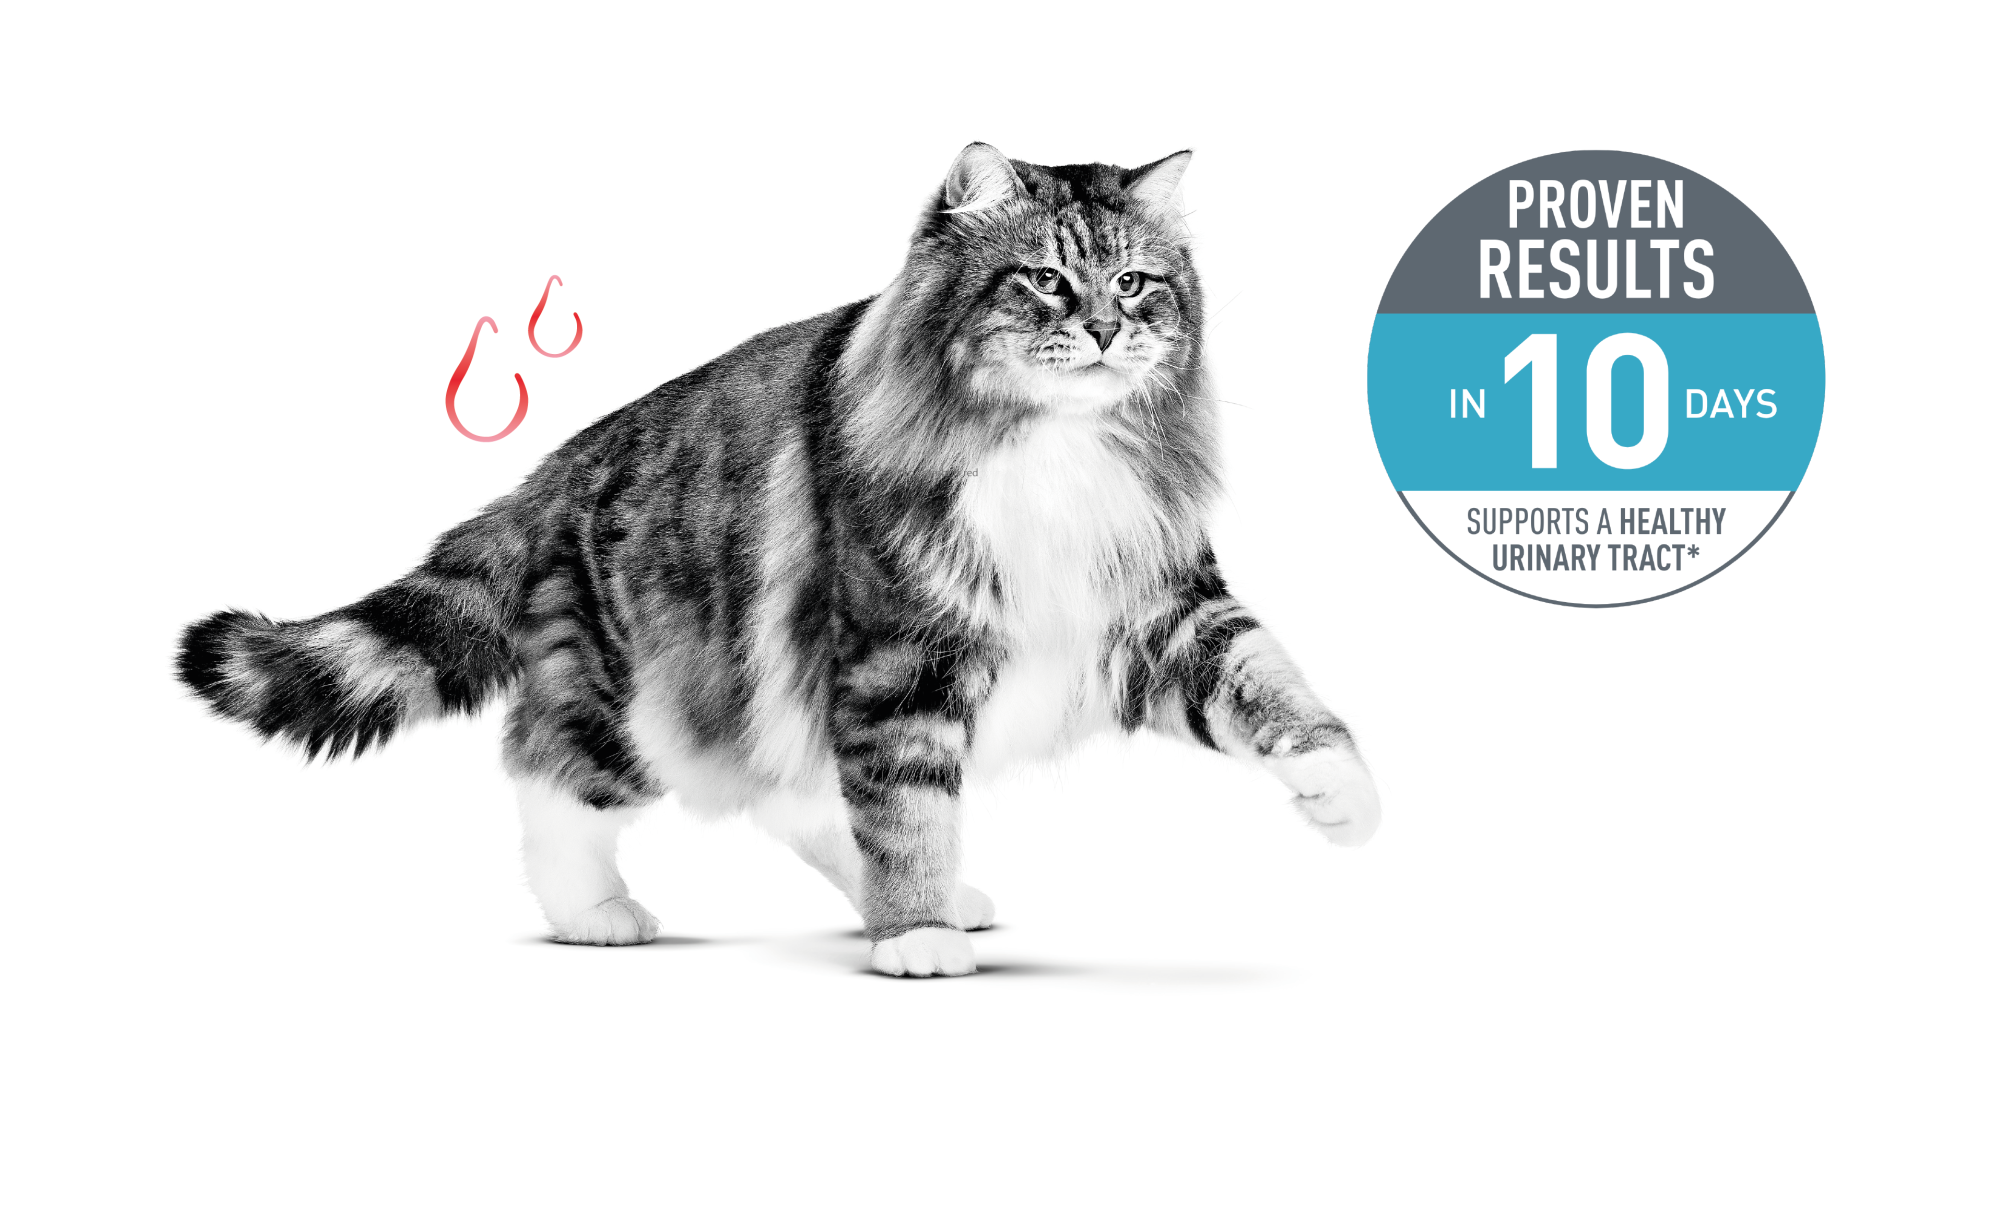 Emblematic of cat with urinary sensitivity and associated proven results